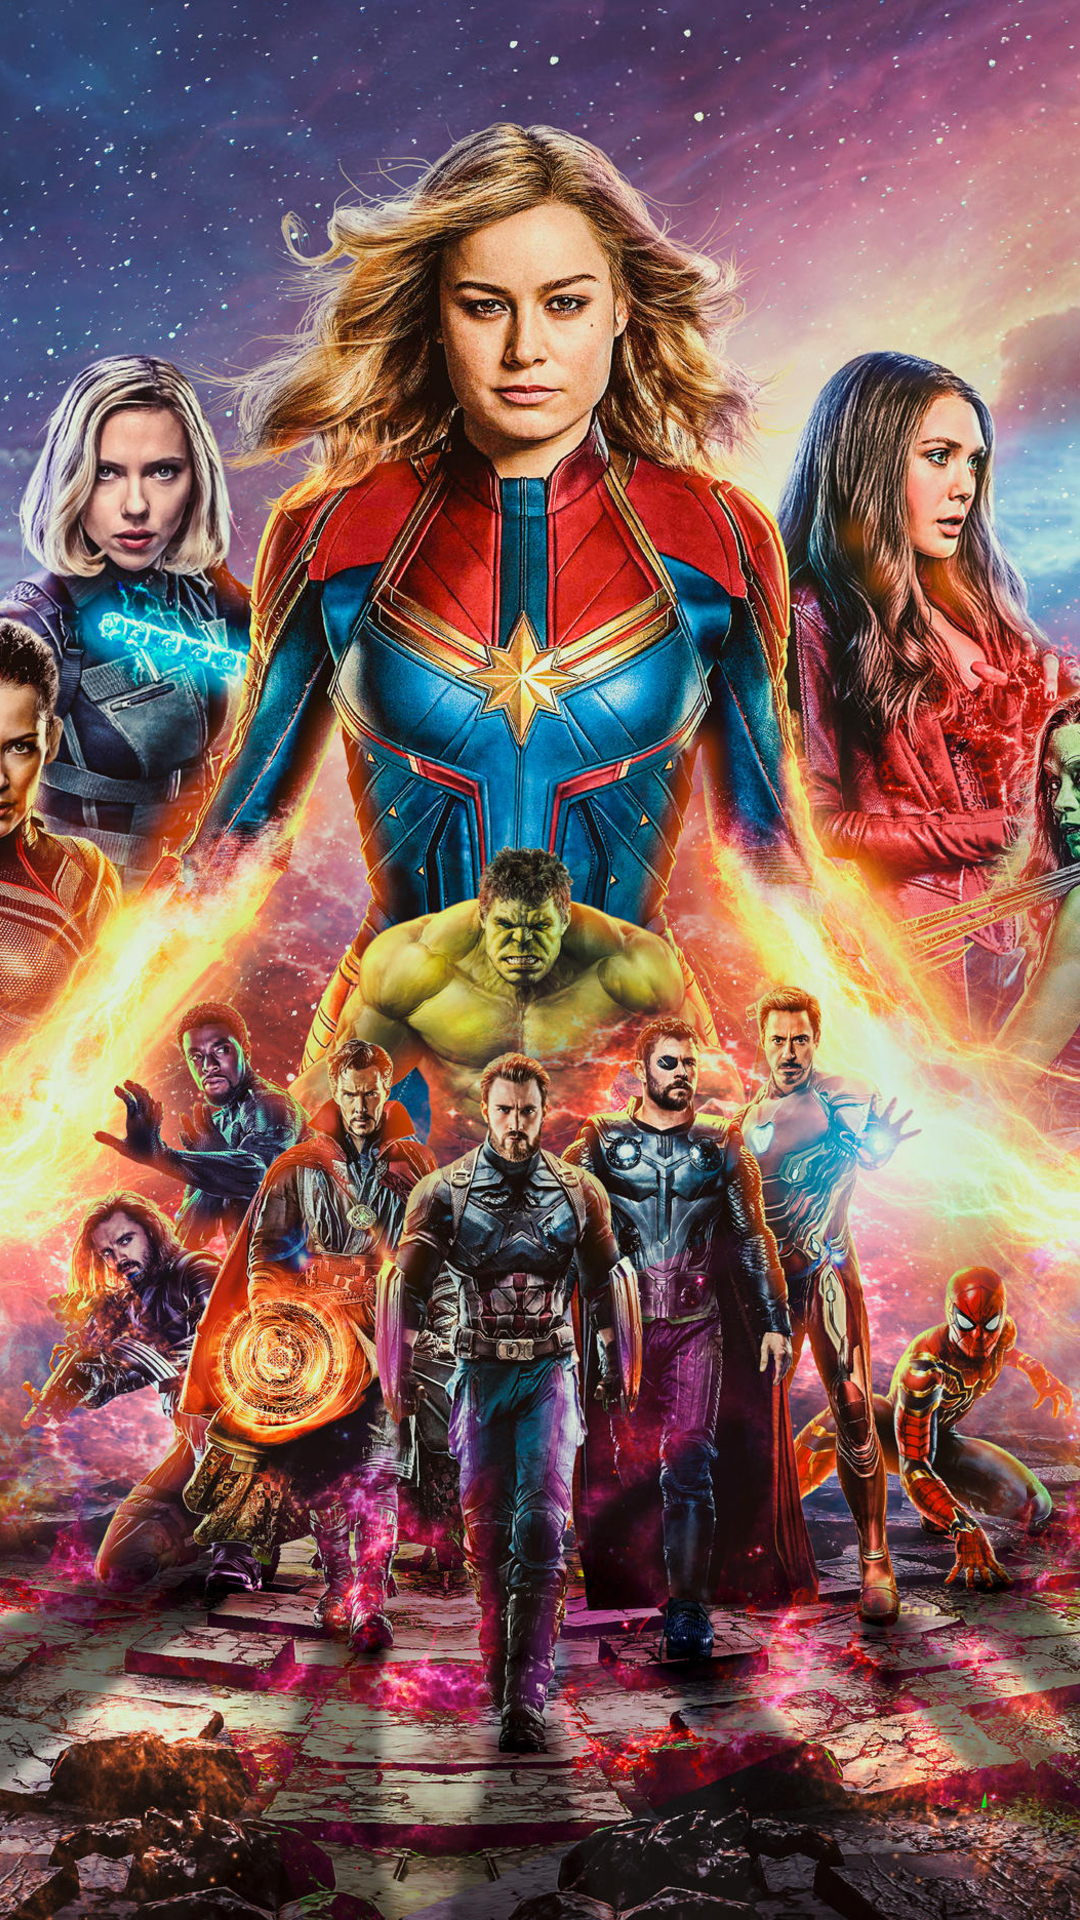 Avengers End Game Iphone 7,6s,6 Plus, Pixel Xl ,one - Avengers Endgame Wallpaper Iphone , HD Wallpaper & Backgrounds